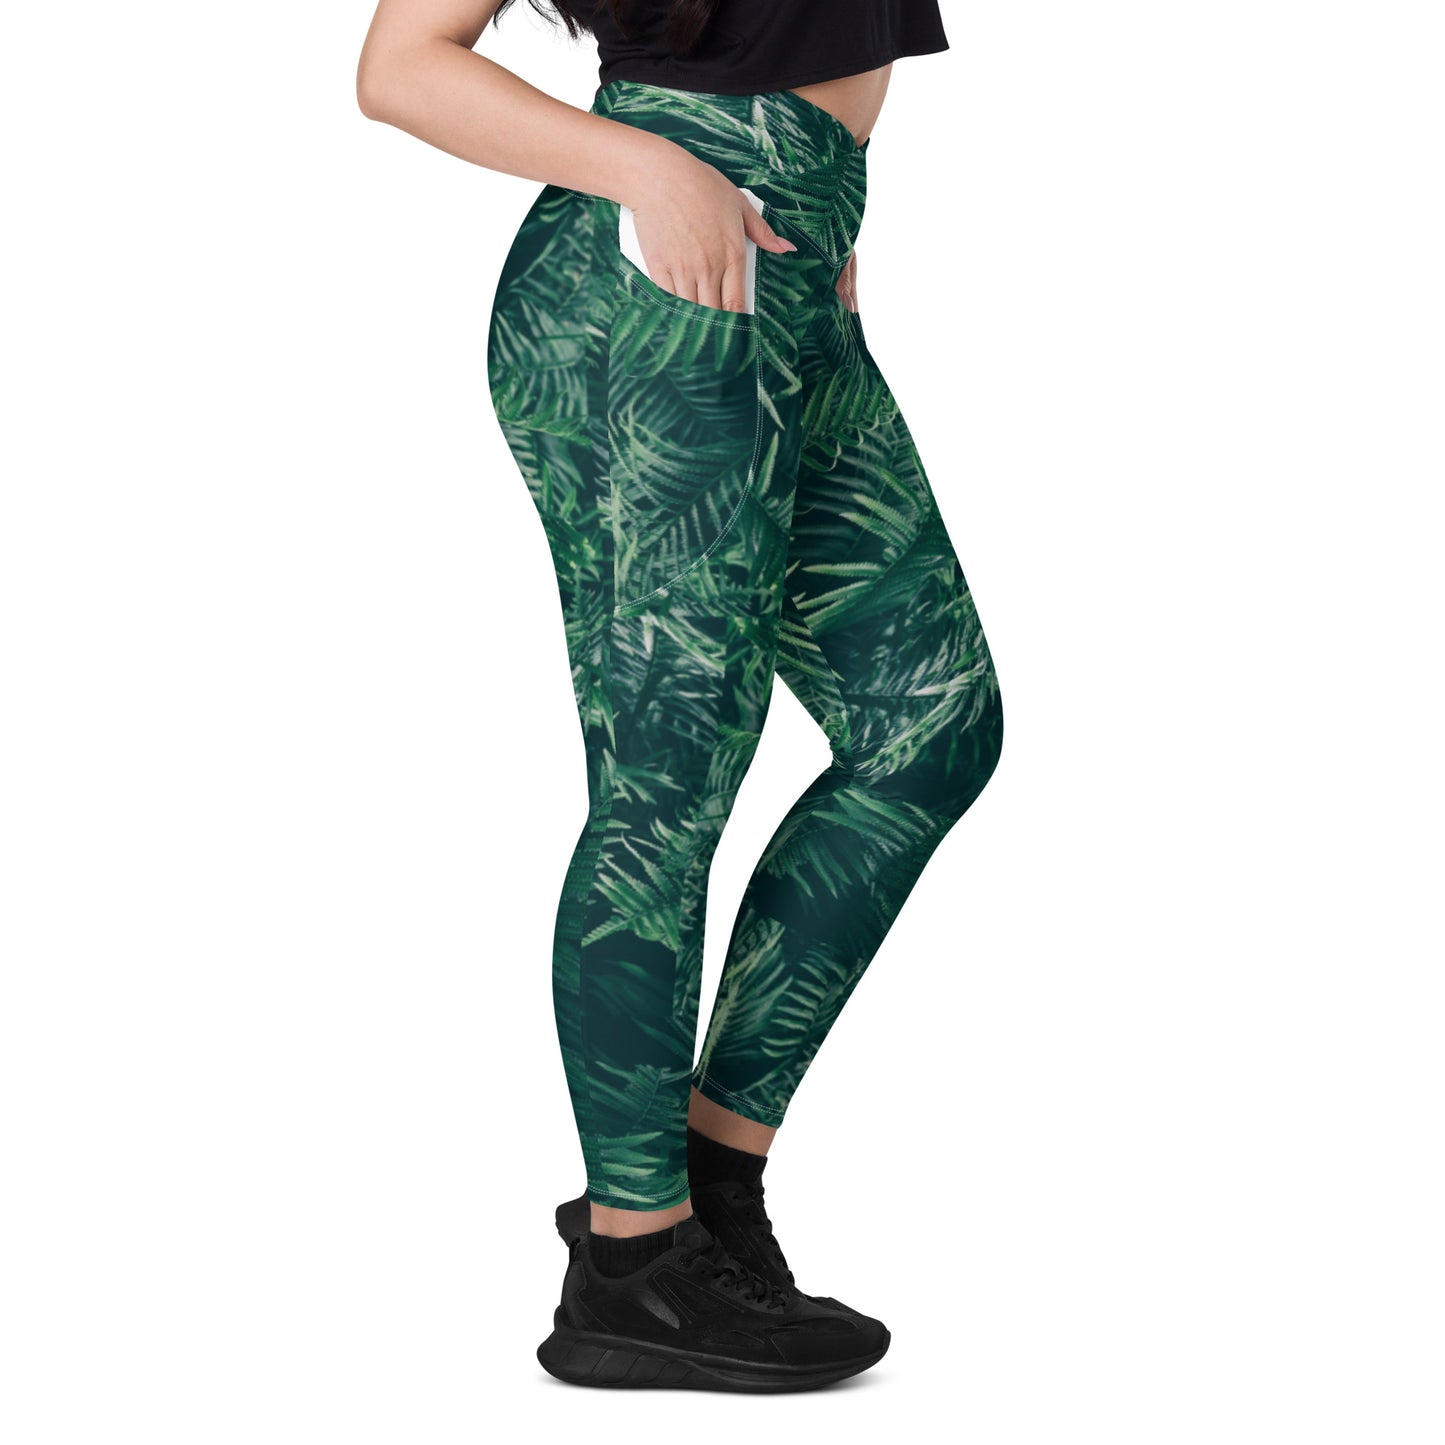 Everything is Fern Crossover leggings with pockets